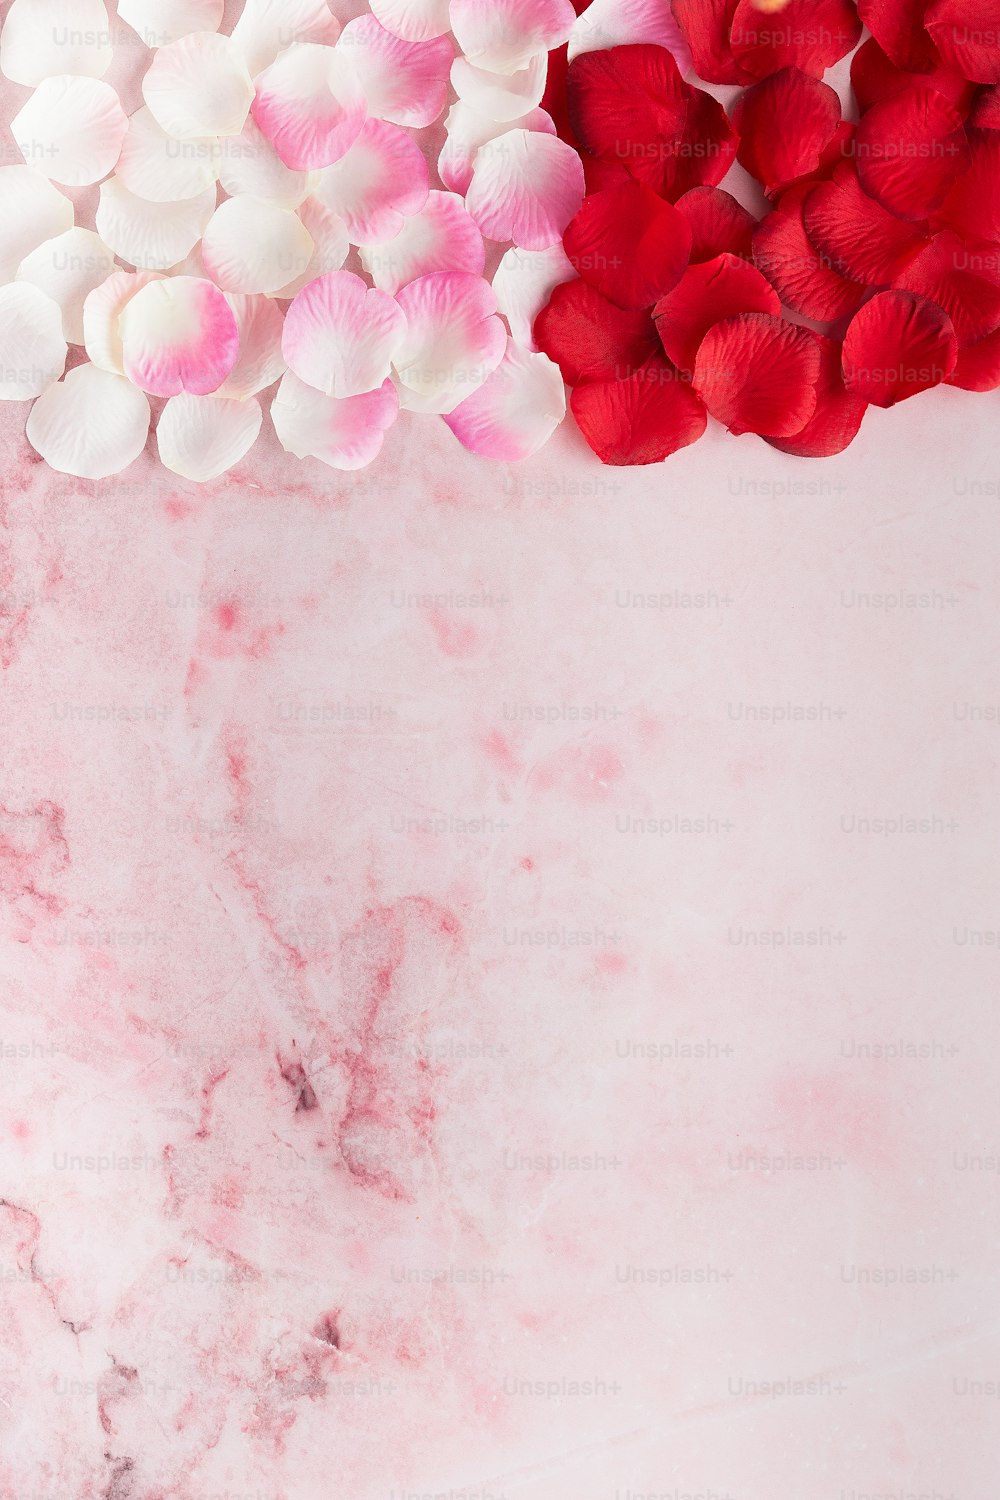 a pink marble background with red and white flowers